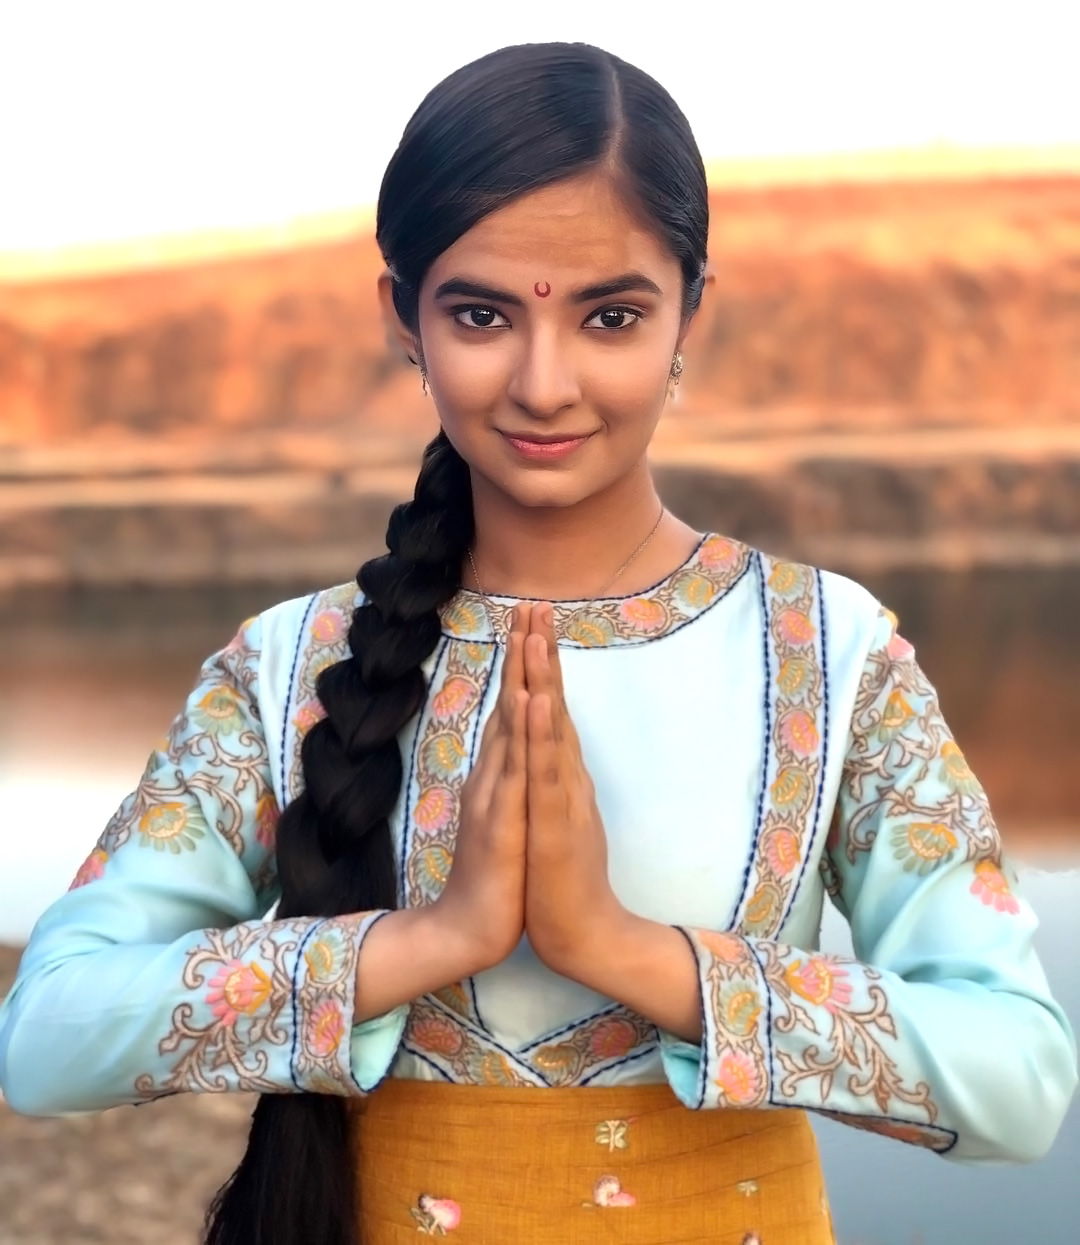 Fun Jhansi Ki Rani Colors Tv Cast 642925 Hd Wallpaper Backgrounds Download She ran aground in 1986 suffering severe damage and sank in 1987 whilst under tow to taiwan for breaking up. fun jhansi ki rani colors tv cast